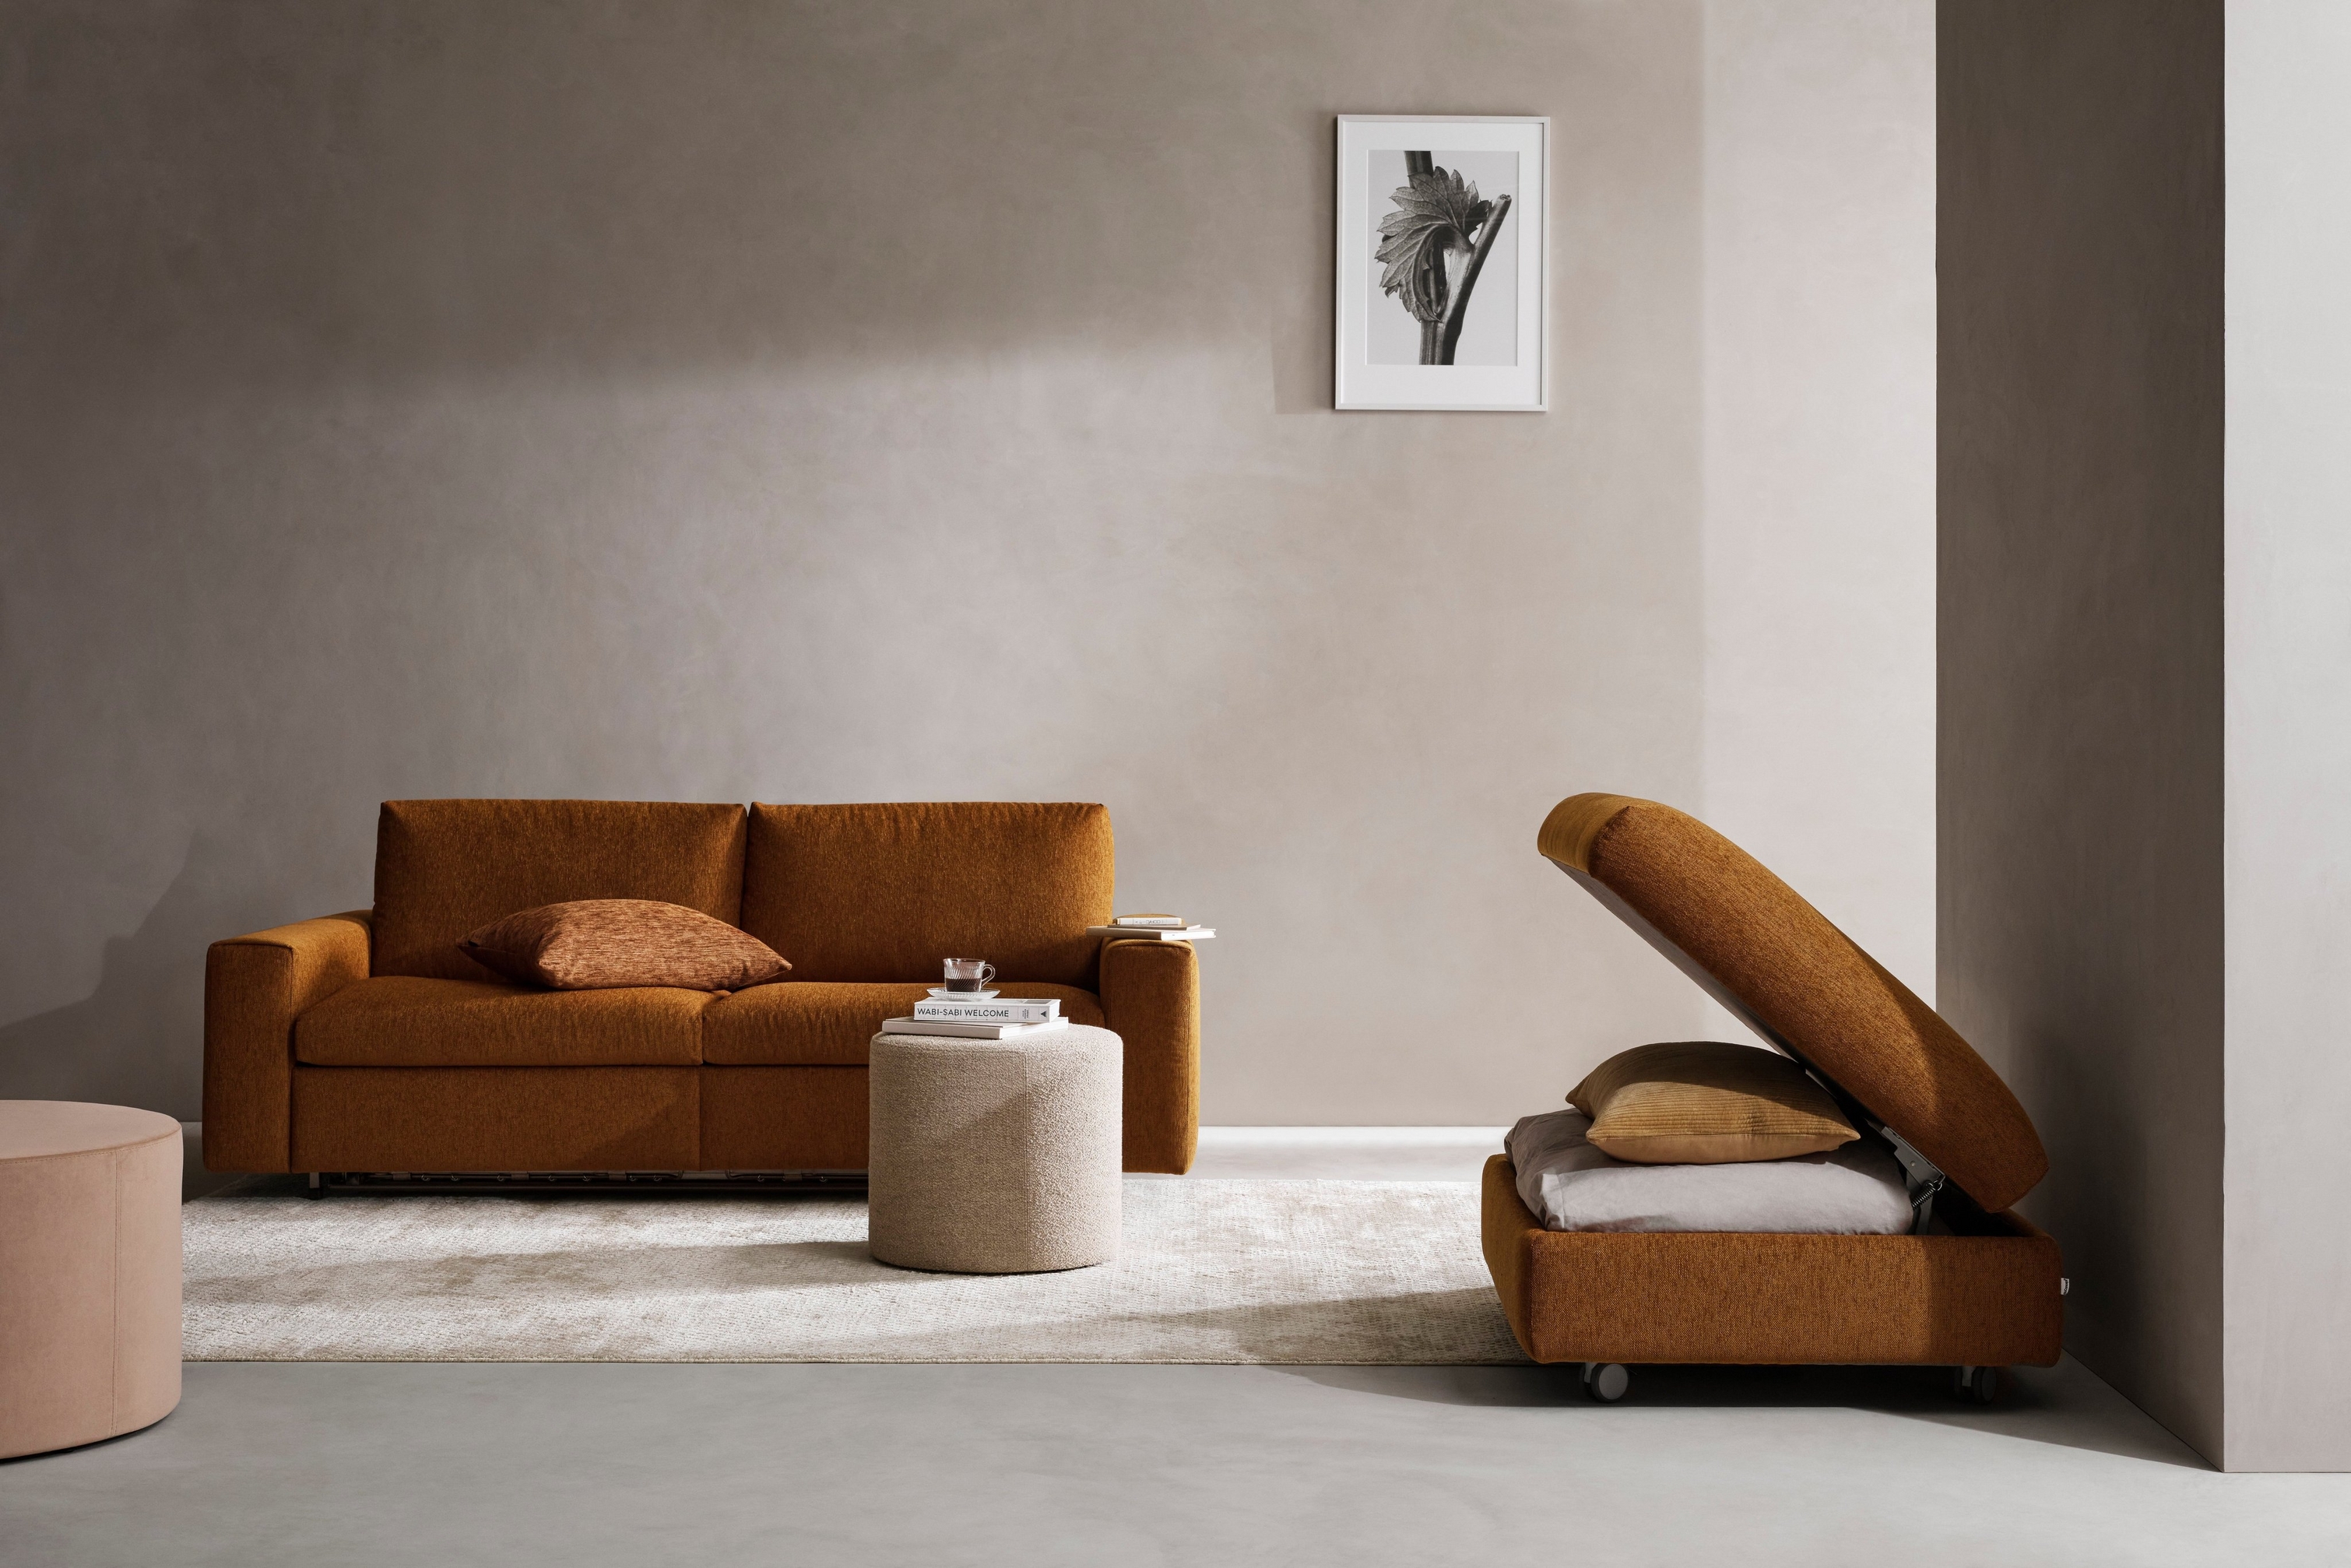 Modern room with a Taylor sofa bed, Taylor storage footstool, and minimalist decor.